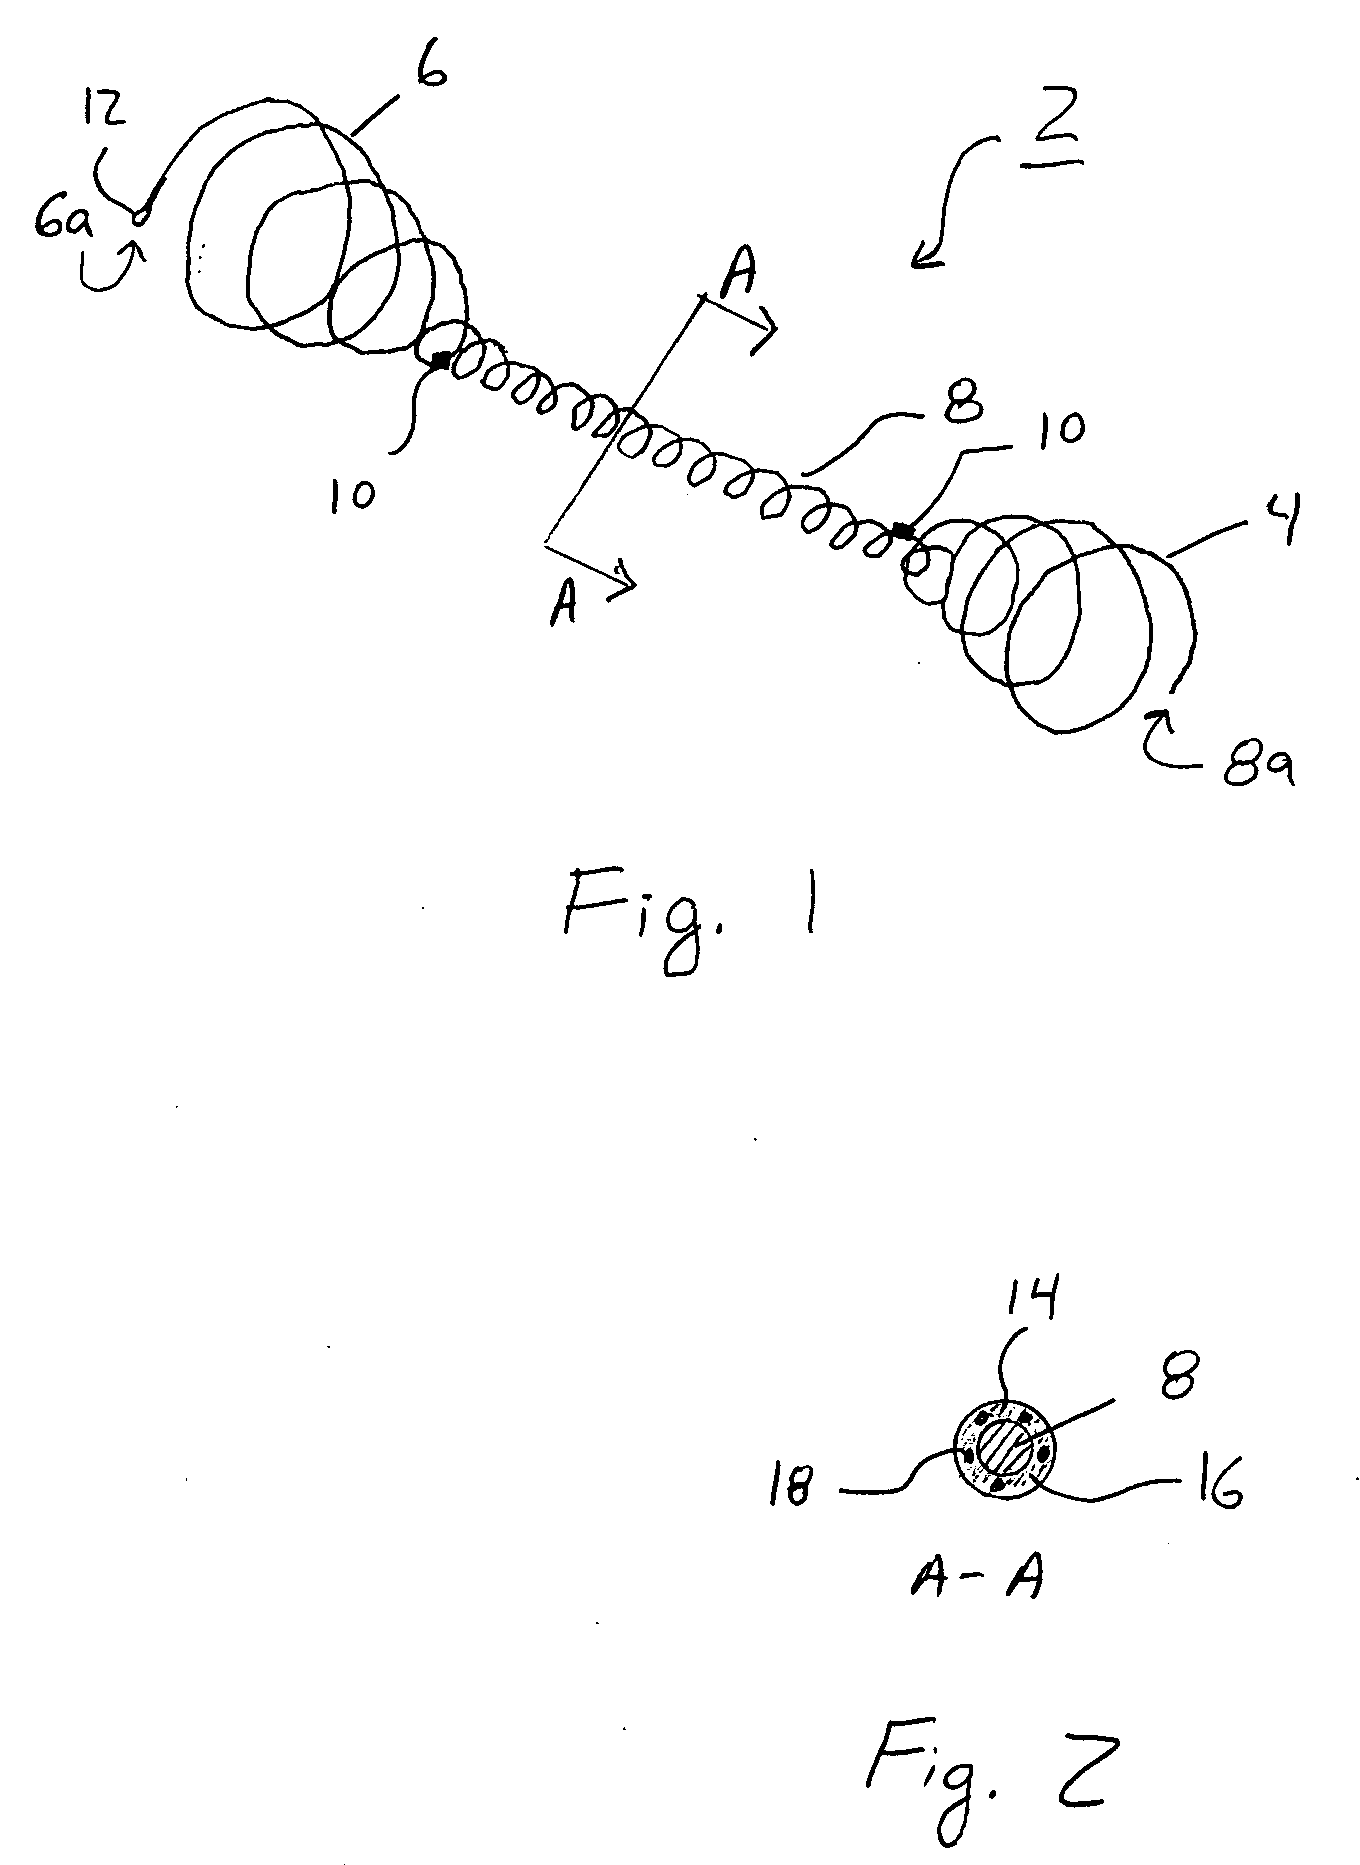 Fallopian tube occlusion devices and methods